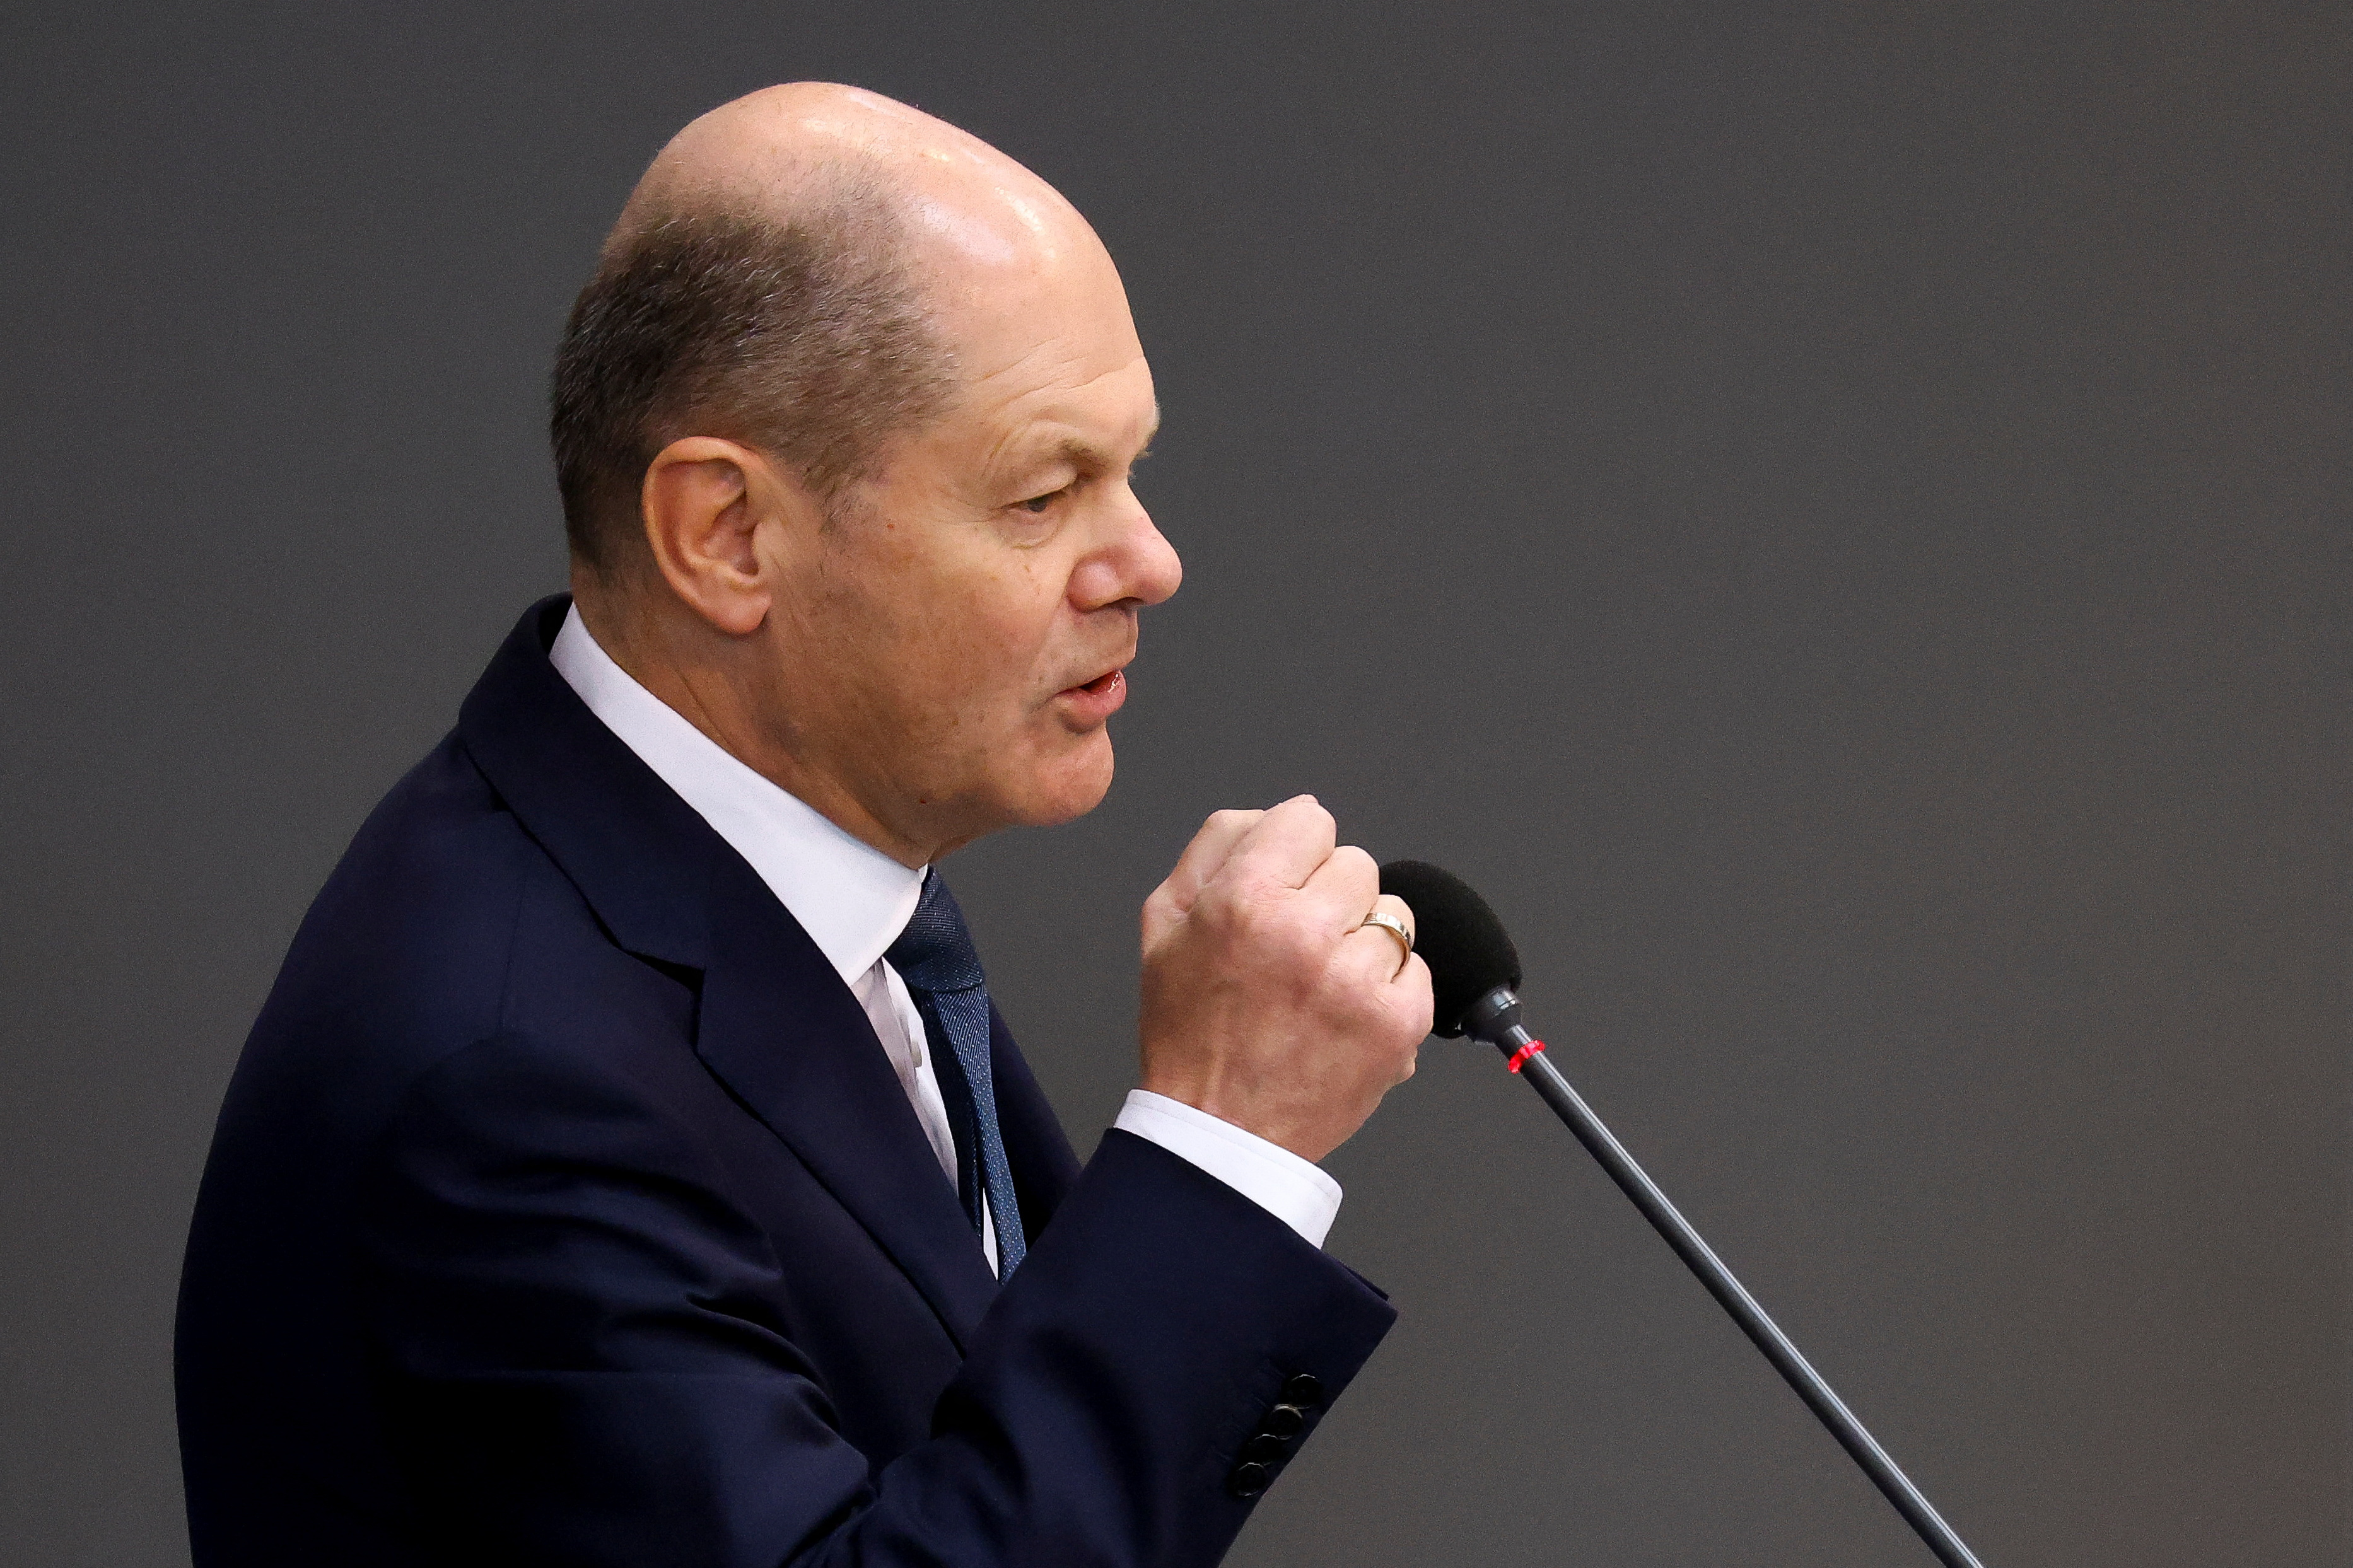 German Chancellor Scholz attends a session of the lower house of parliament Bundestag, in Berlin